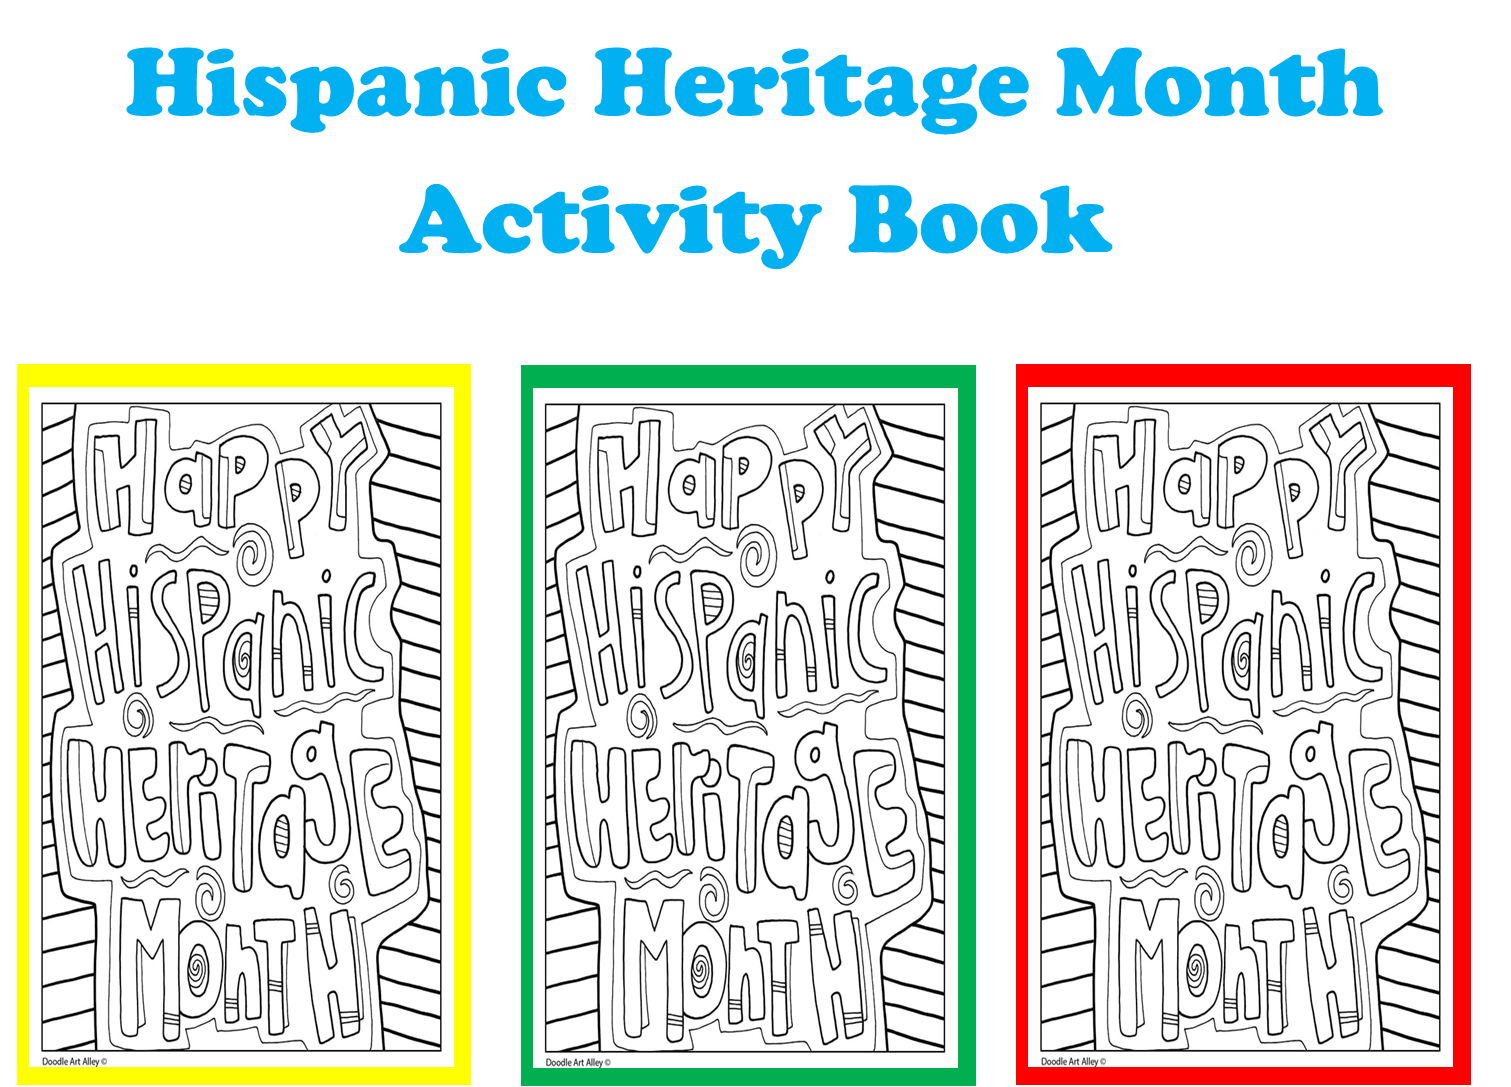 Hispanic Heritage Month Activity Book available starting Sept 14 at the Main Library. Activity books can be picked up between 9am-7pm, Monday through Friday while supplies last.